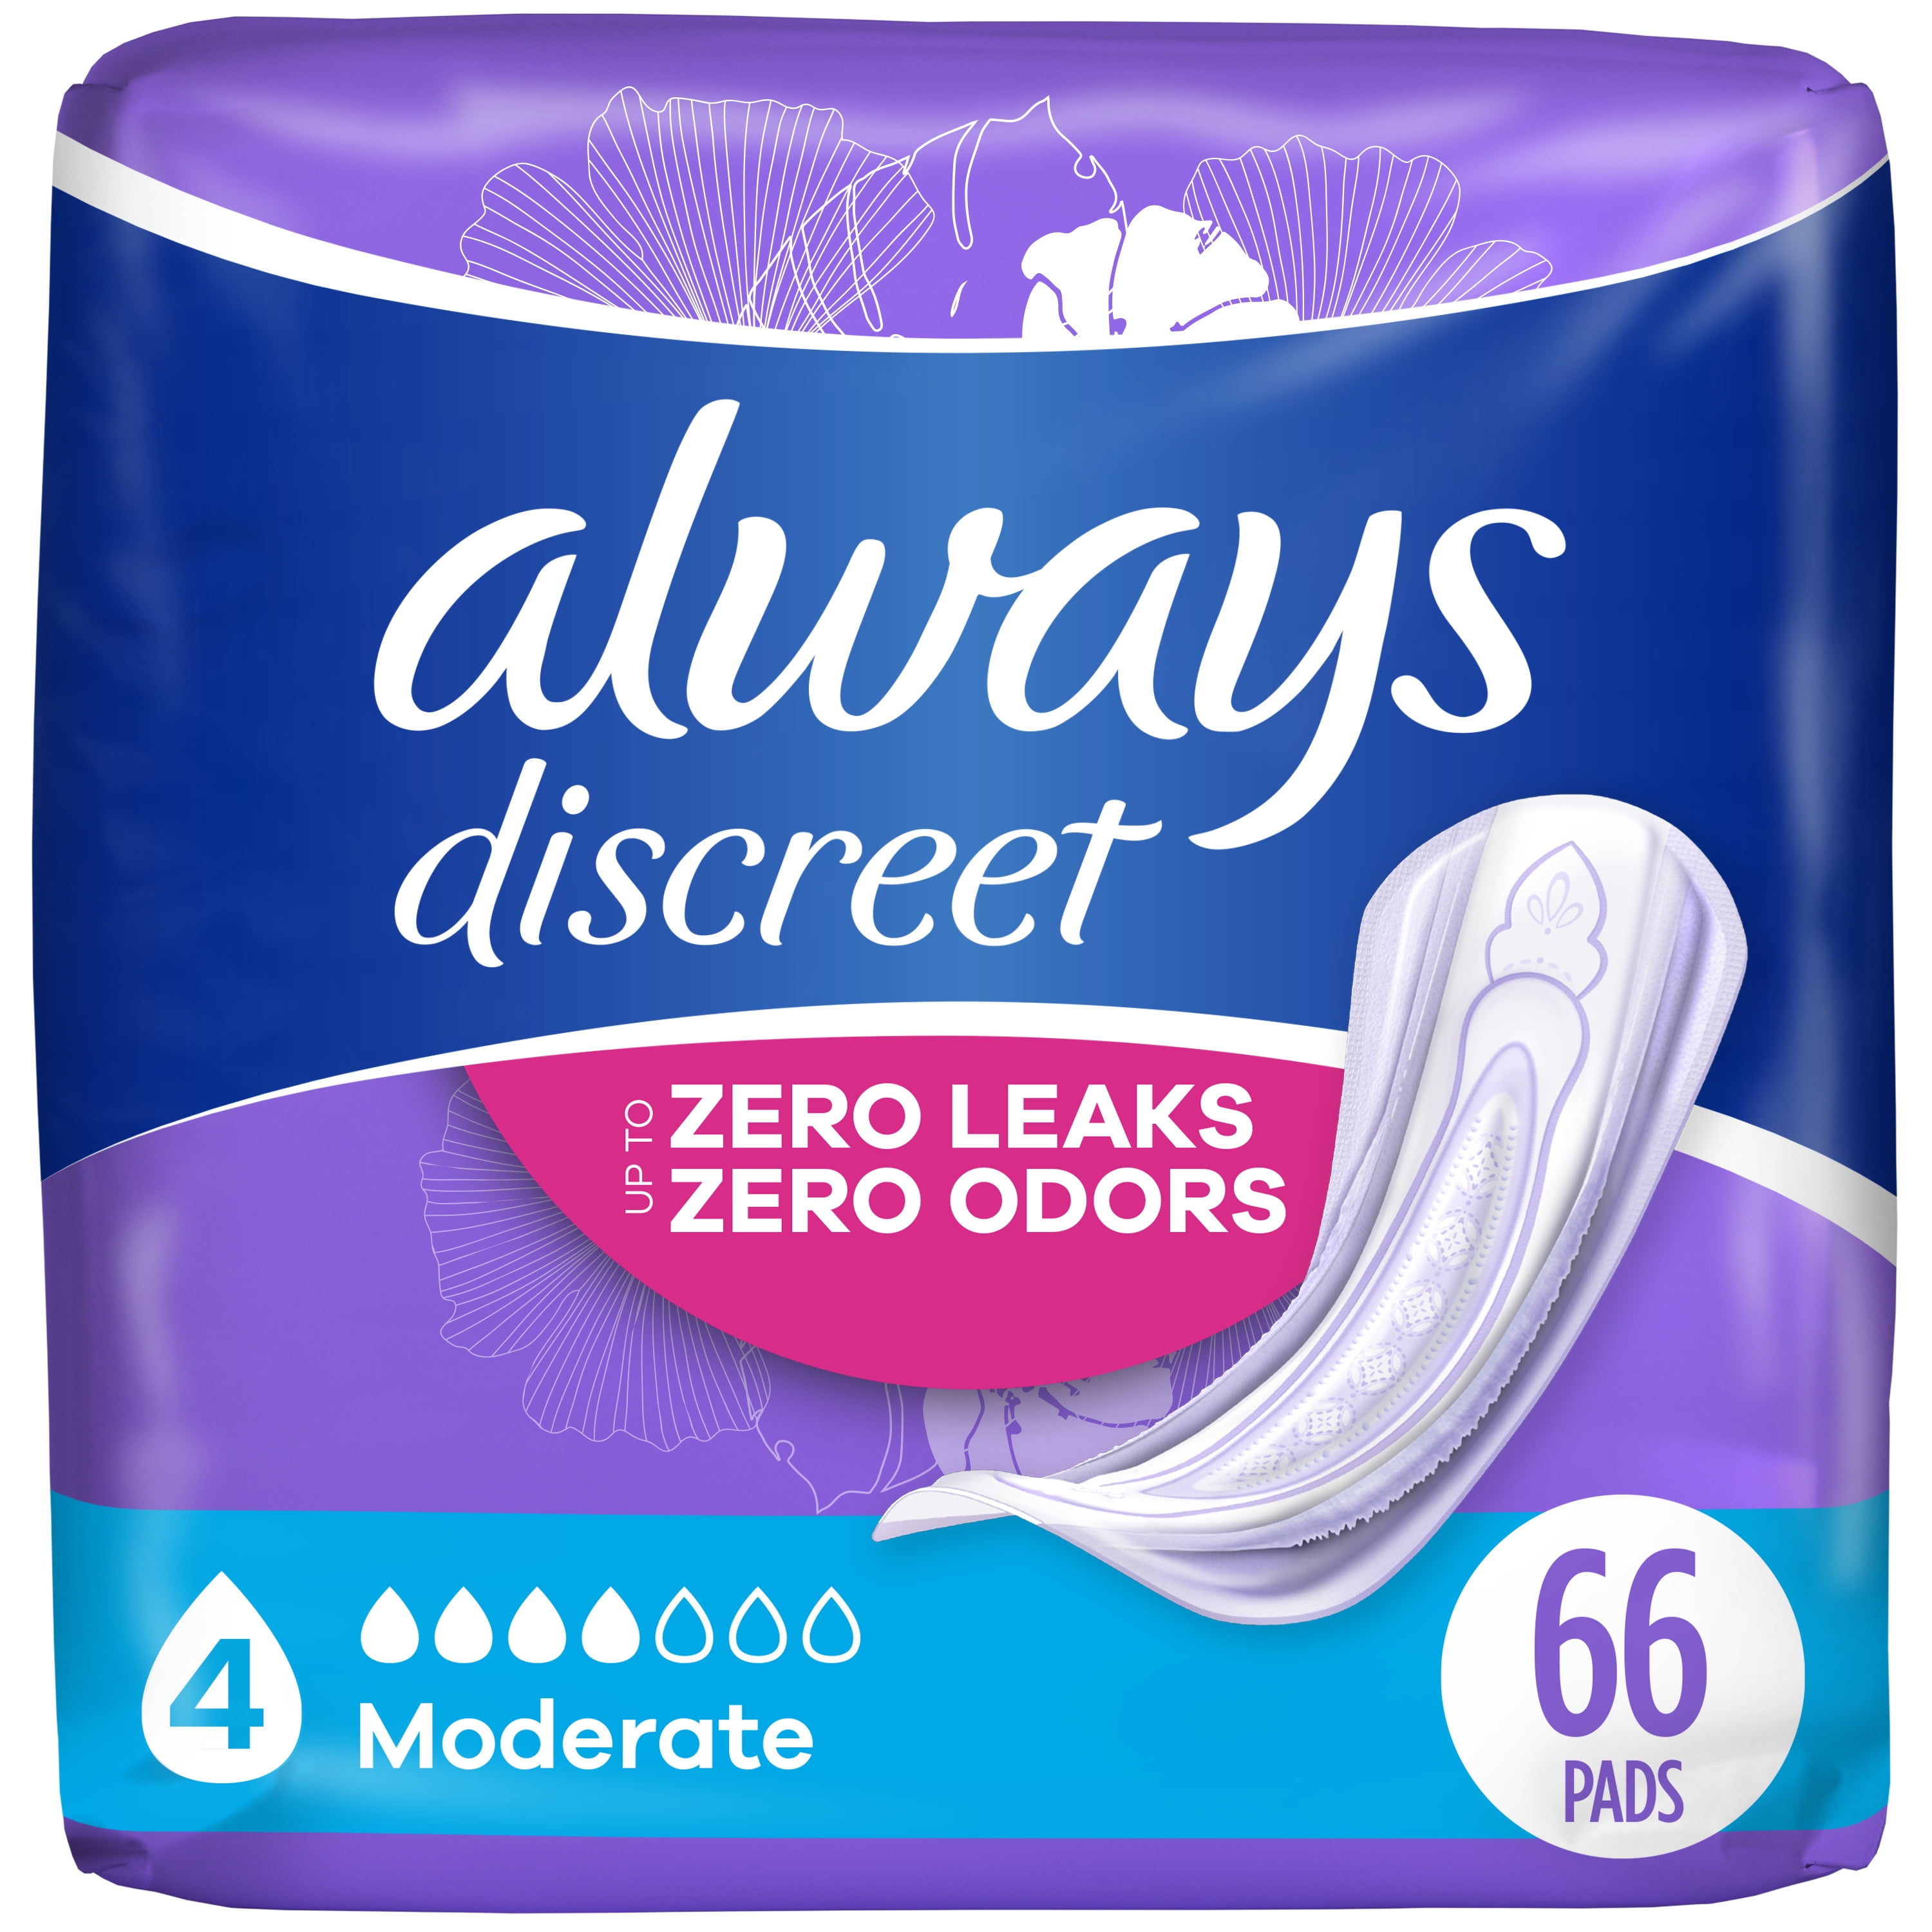 Always Discreet Long Plus Incontinence Slip Intimate Pads 28 Pieces - VMD  parfumerie - drogerie